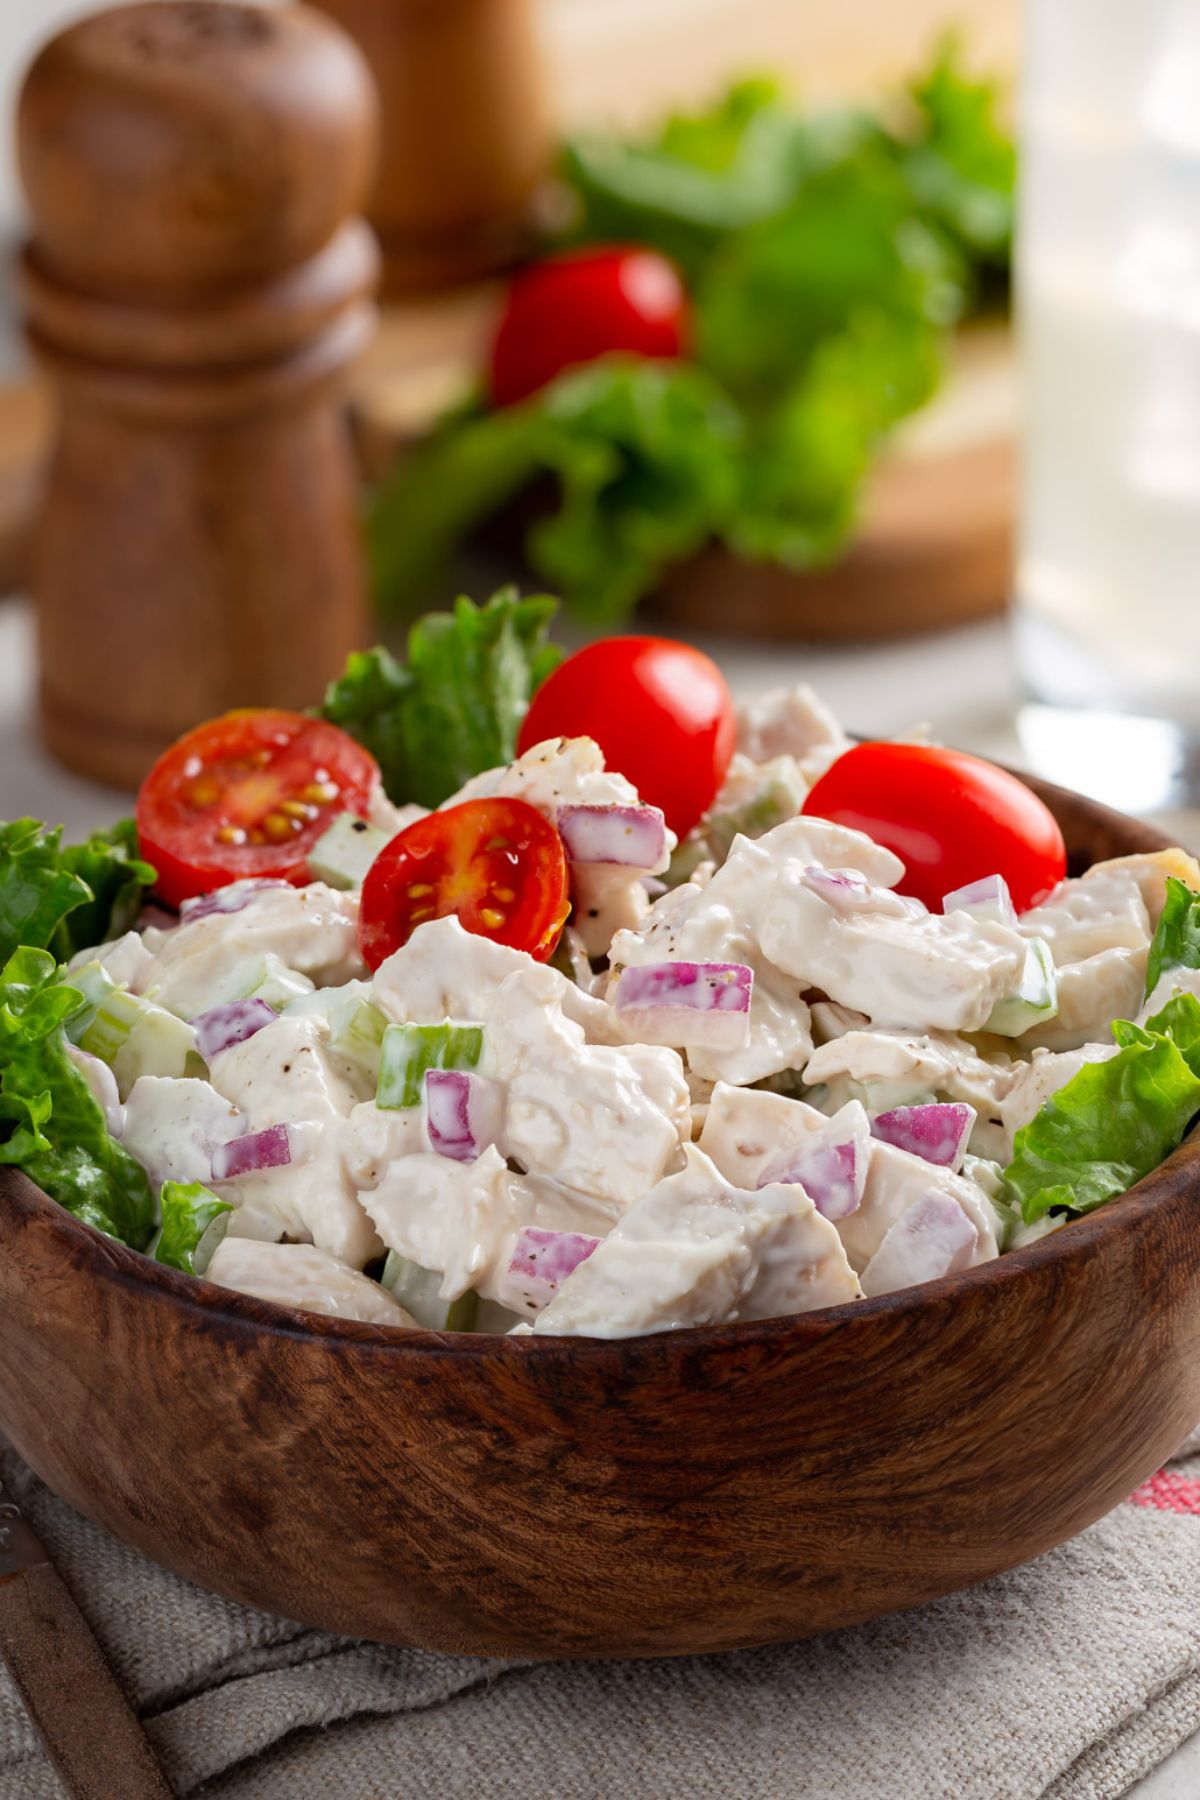 chicken salad in a wood bowl with tomatoes